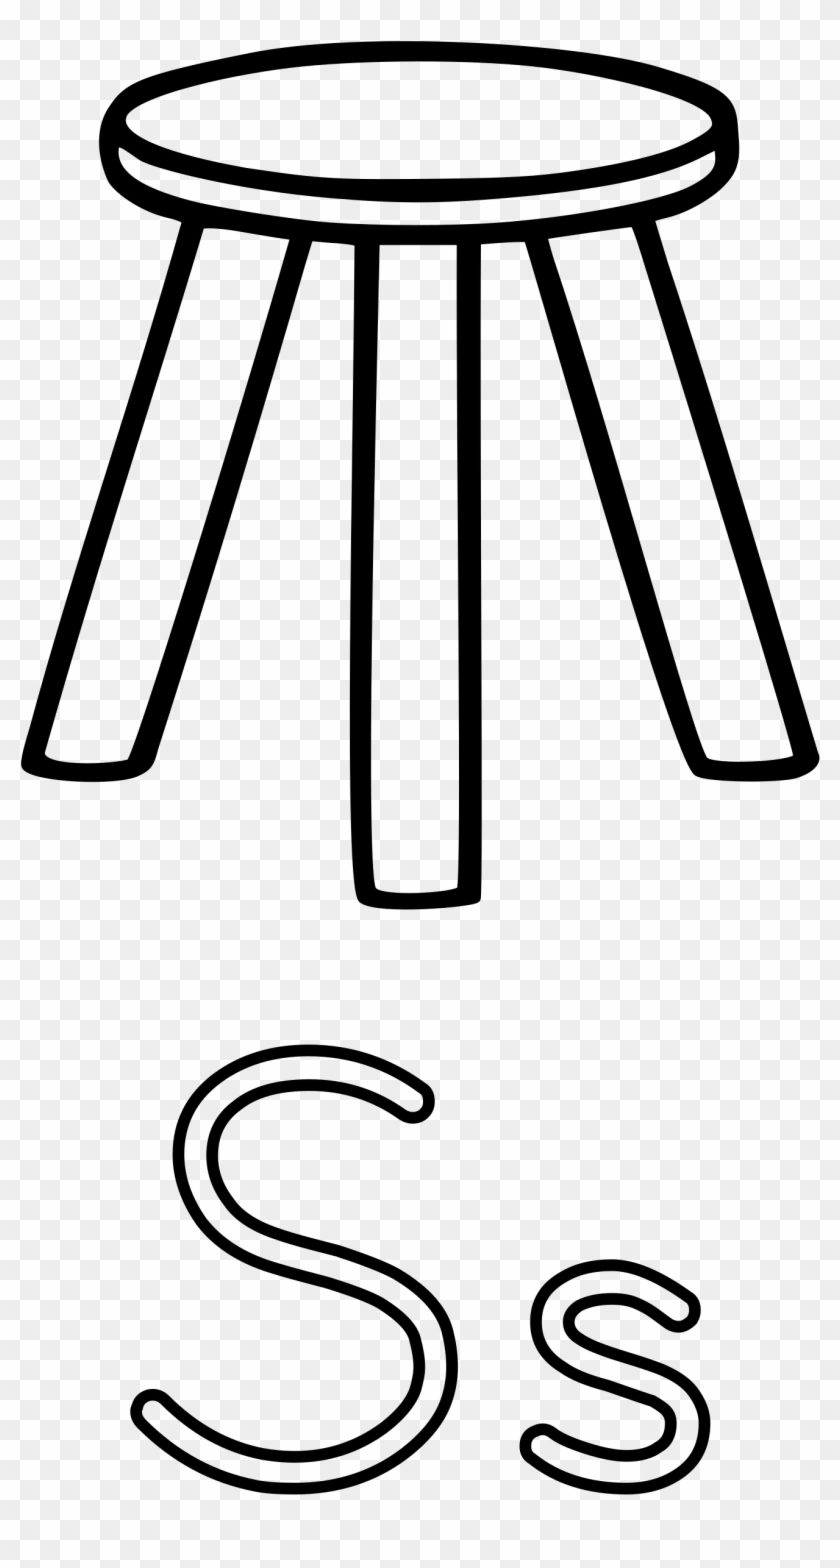 This Free Icons Png Design Of S Is For Stool Clipart